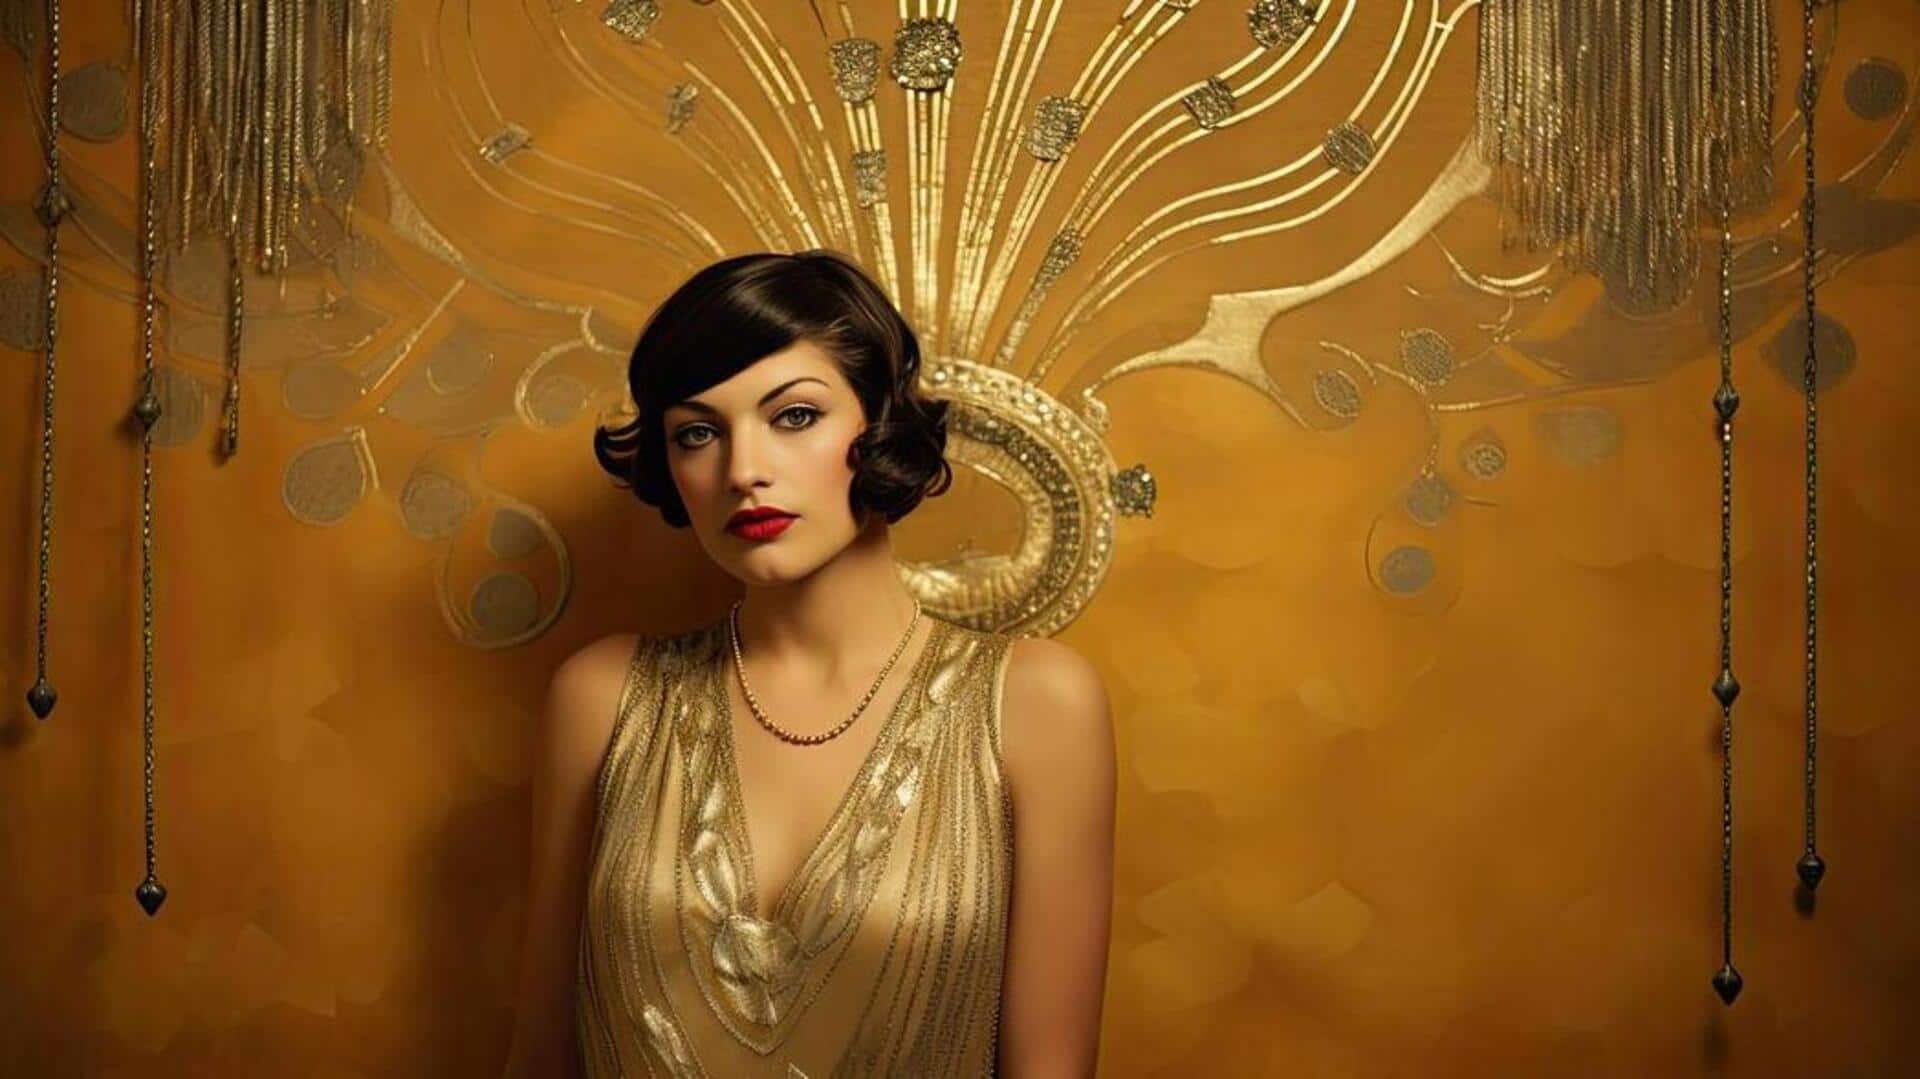 Art Deco fashion makes for a timeless aesthetic